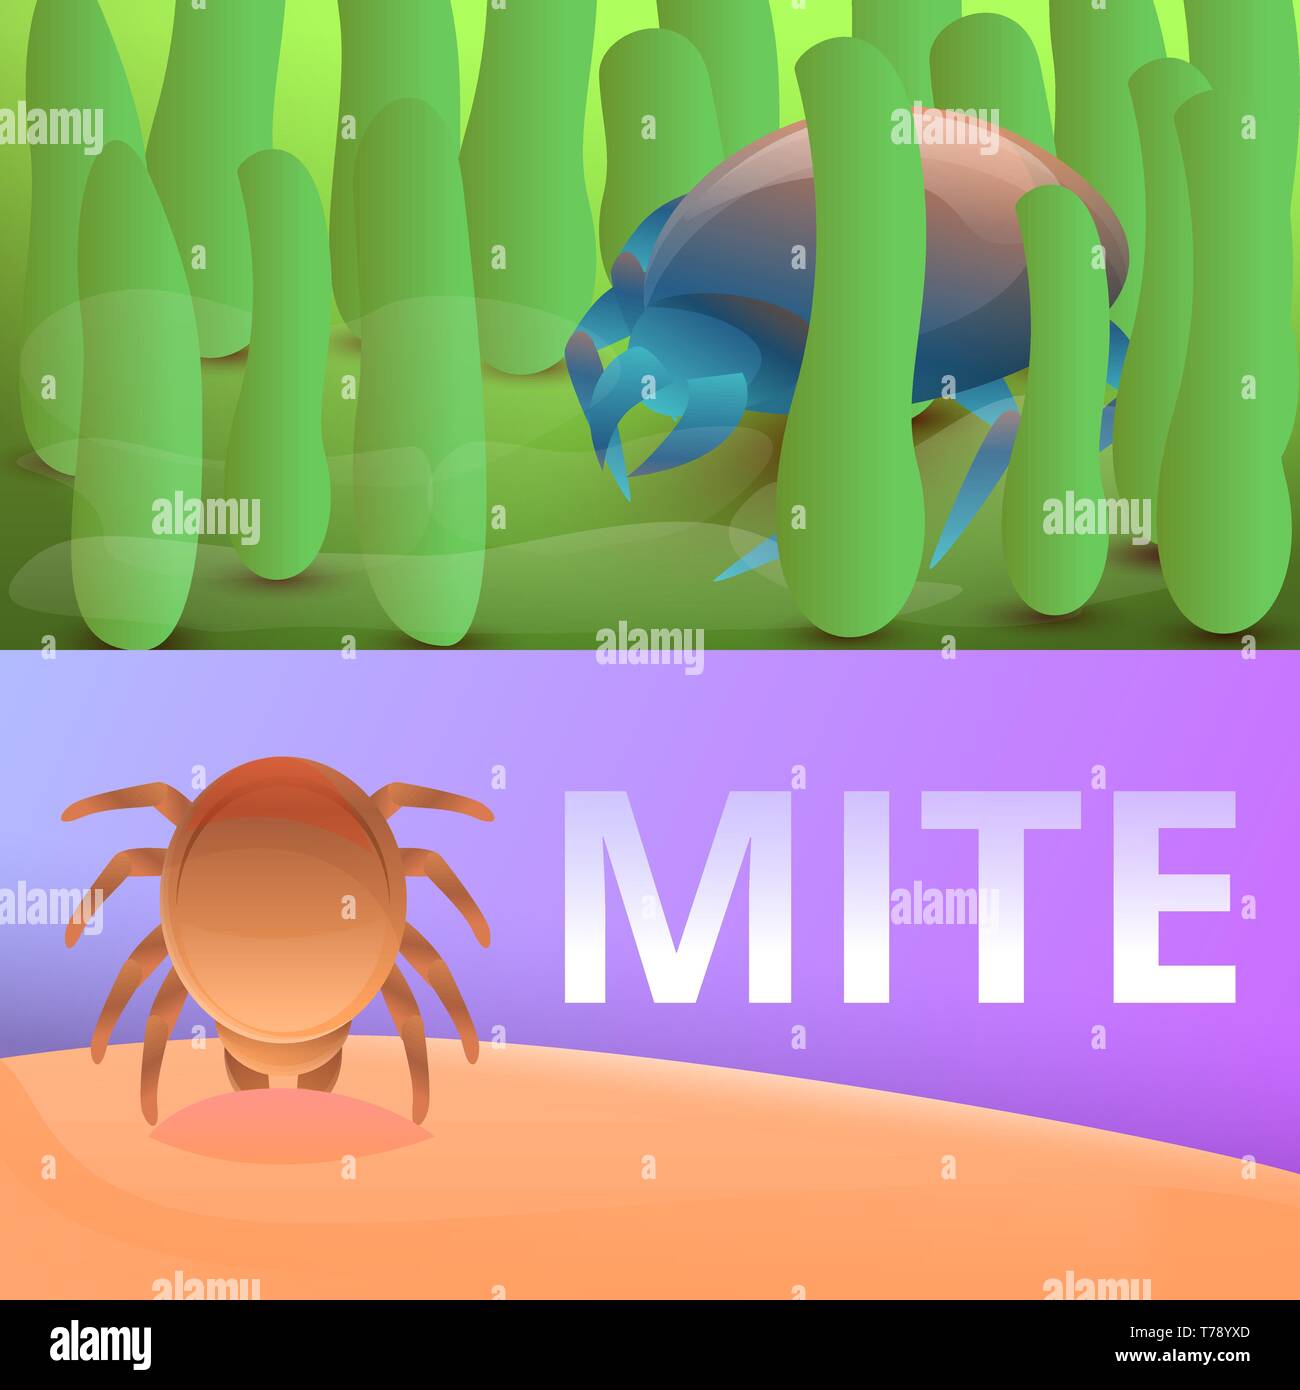 Insect mite banner set. Cartoon illustration of insect mite vector banner set for web design Stock Vector